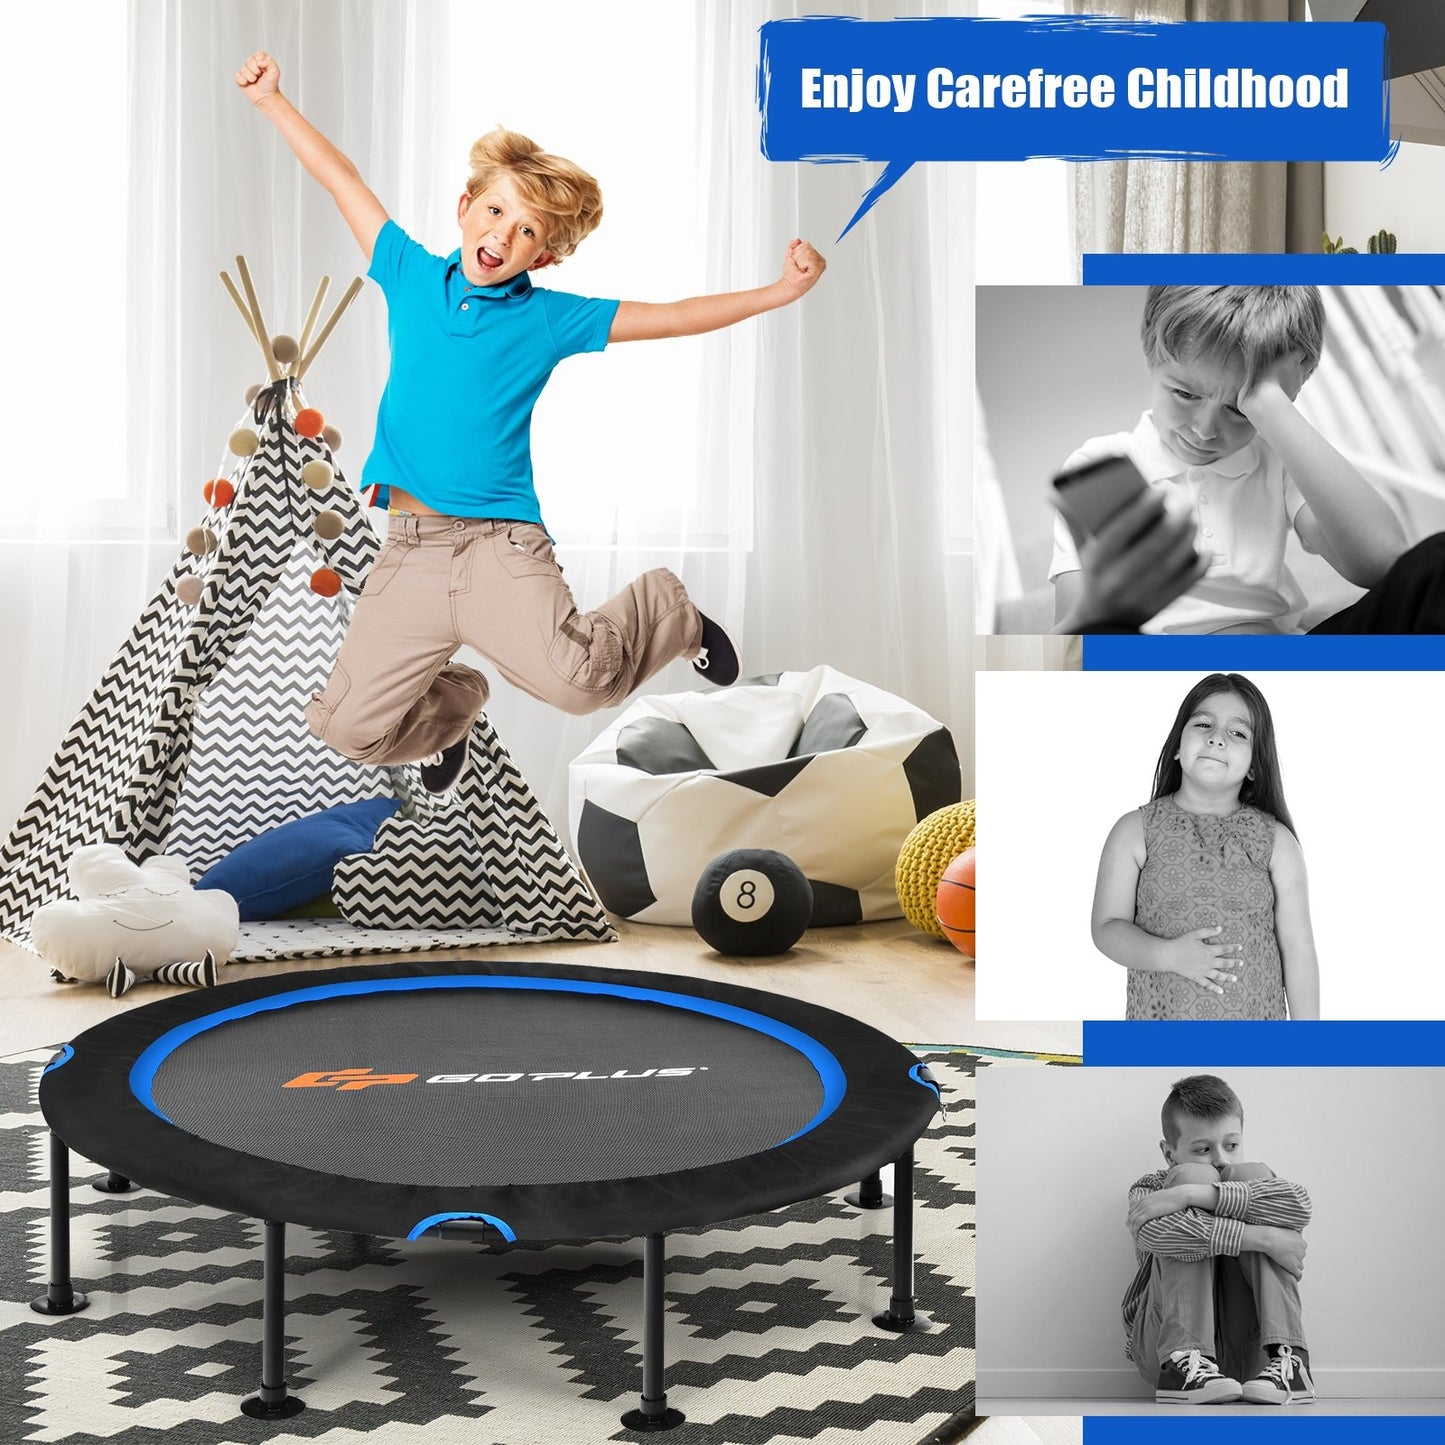 47 Inch Folding Trampoline Fitness Exercise Rebound with Safety Pad Kids and Adults, Blue at Gallery Canada